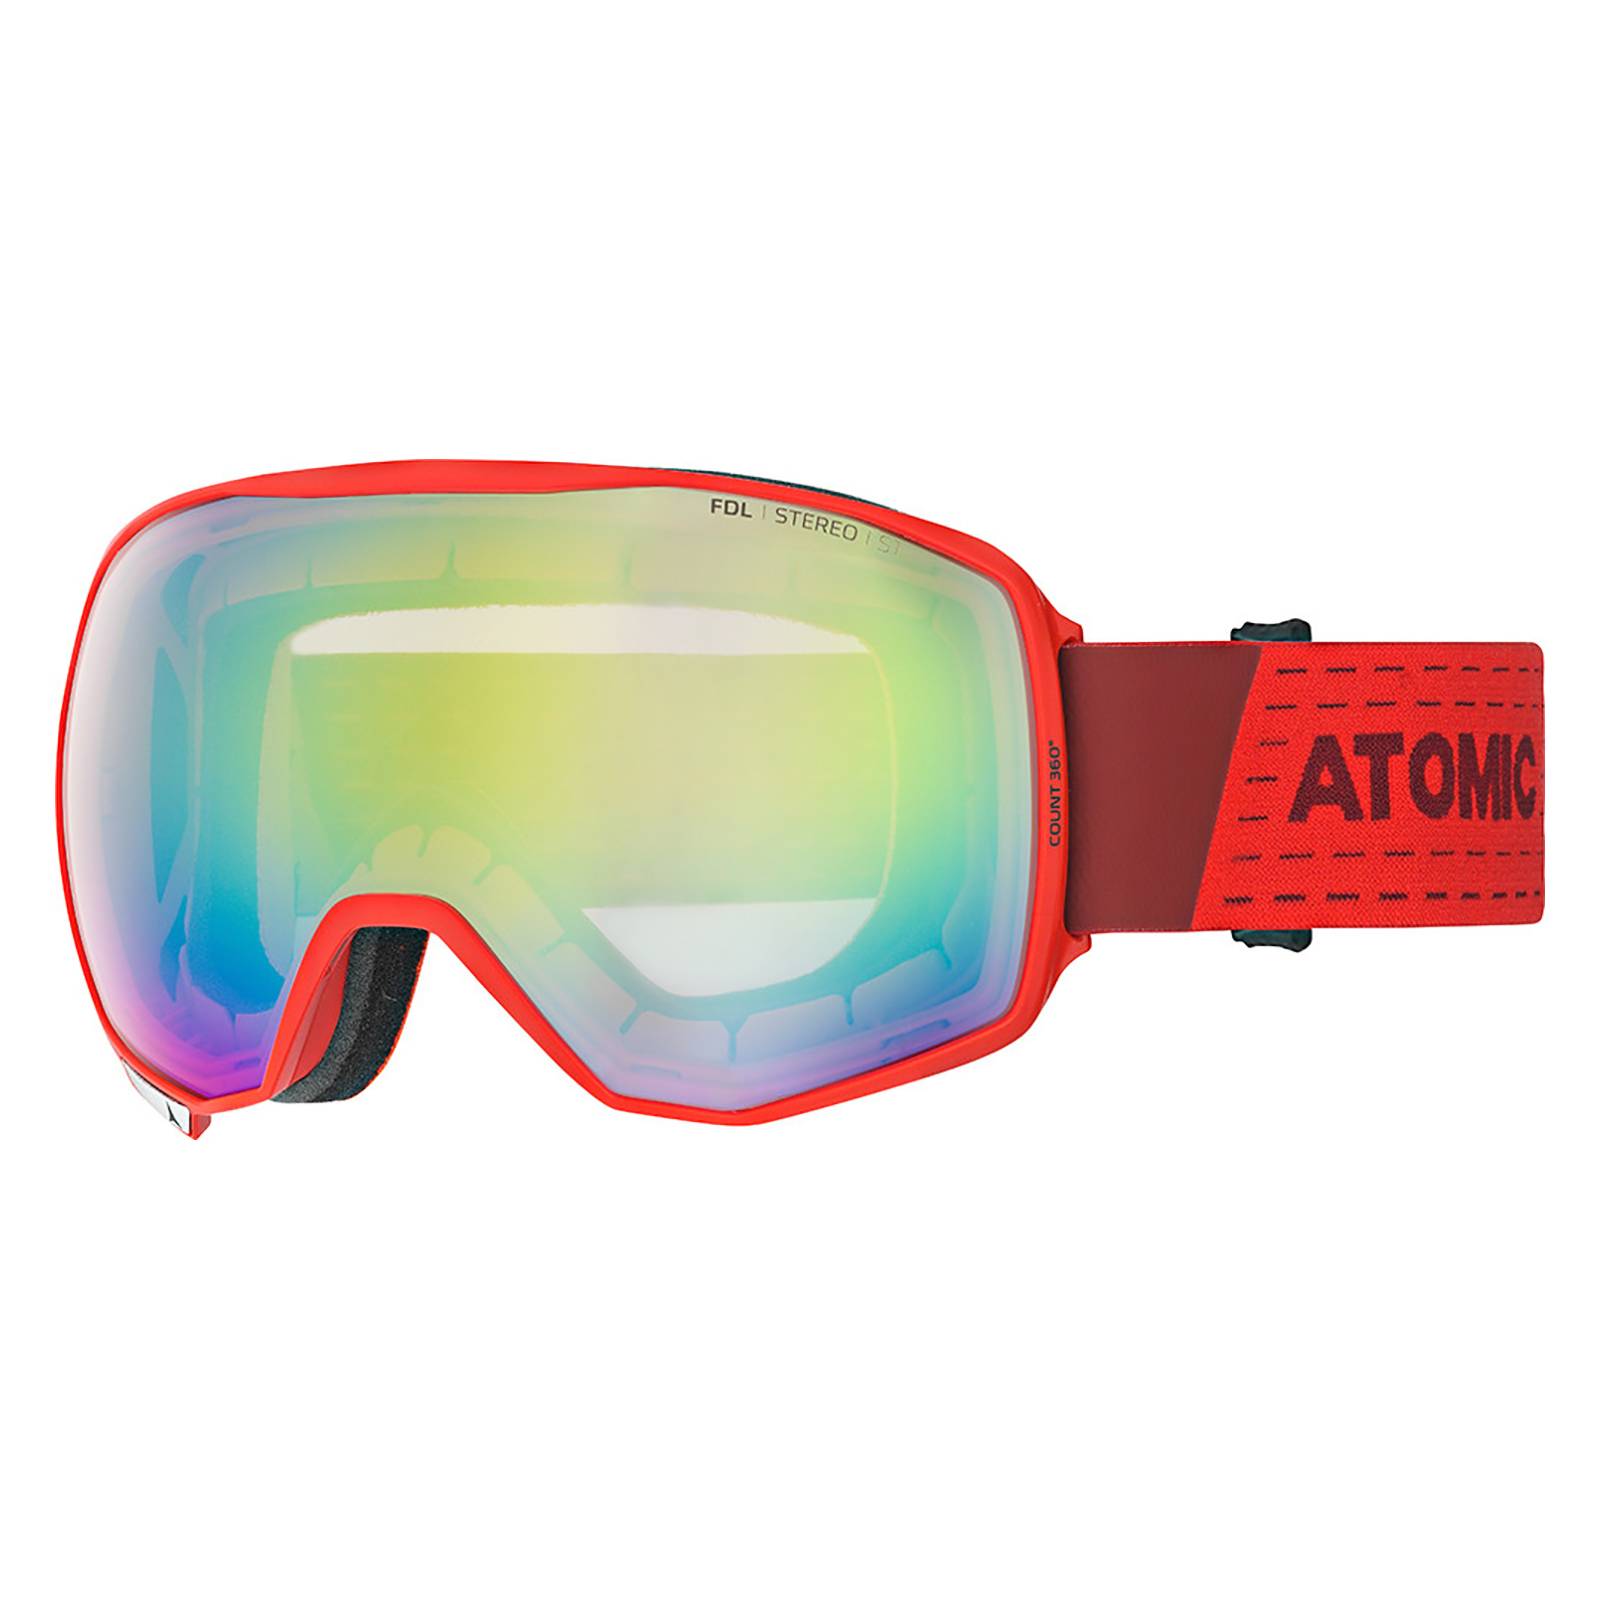 ATOMIC Count 360° Stereo Skibrille rot